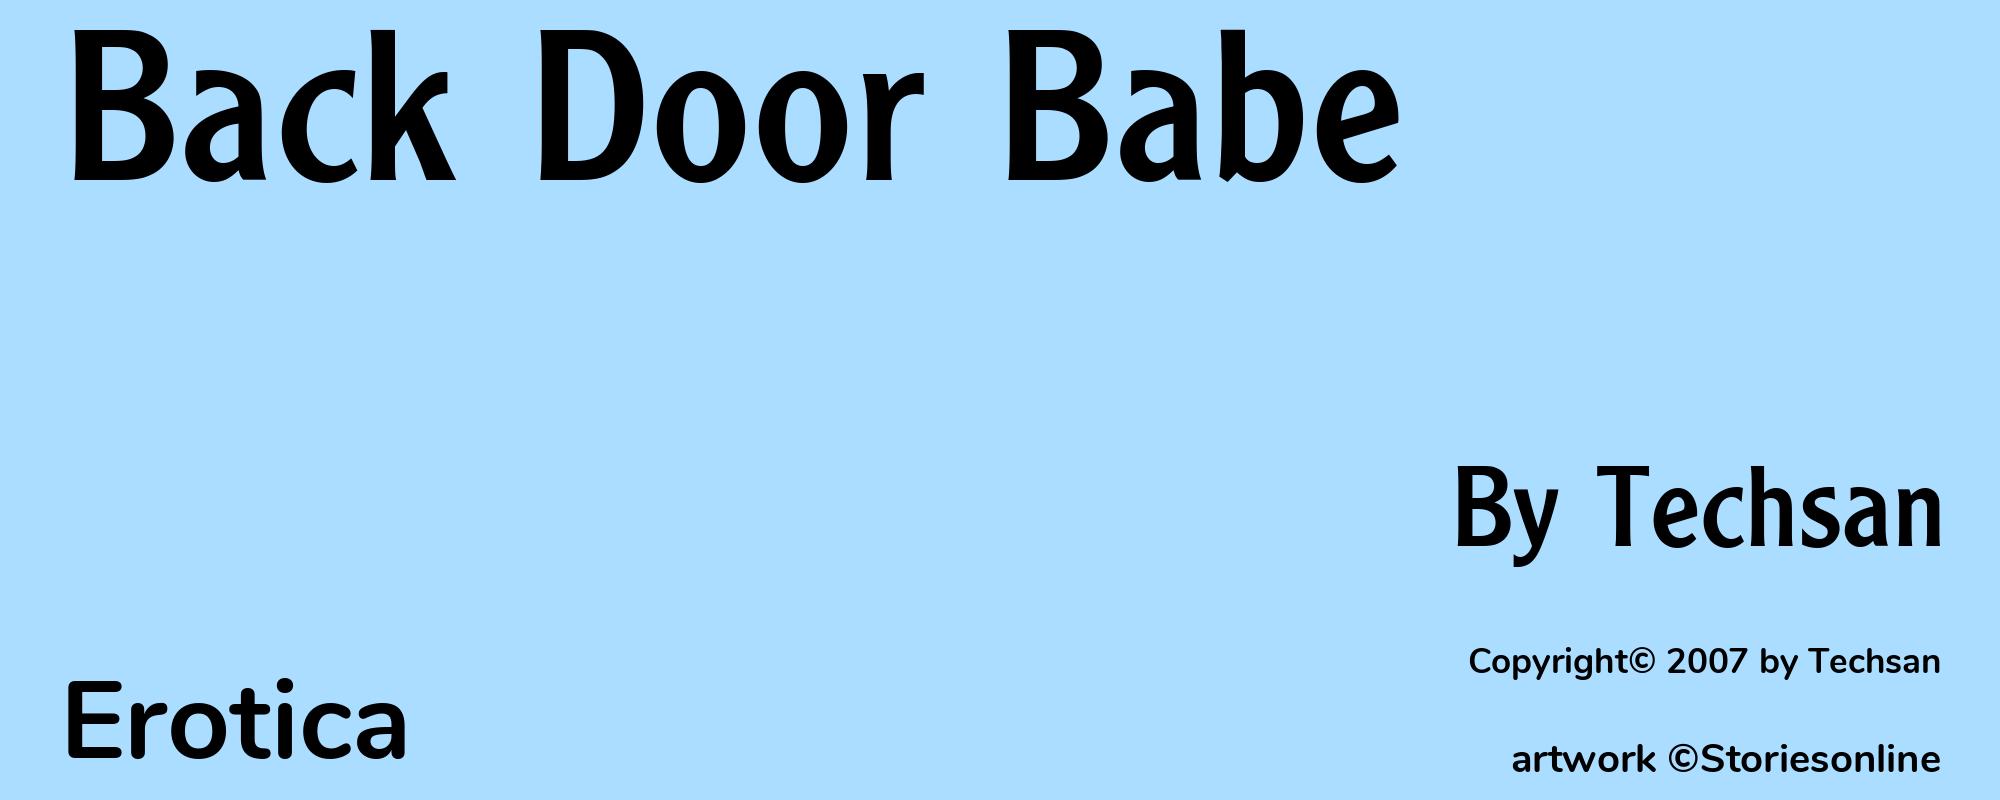 Back Door Babe - Cover